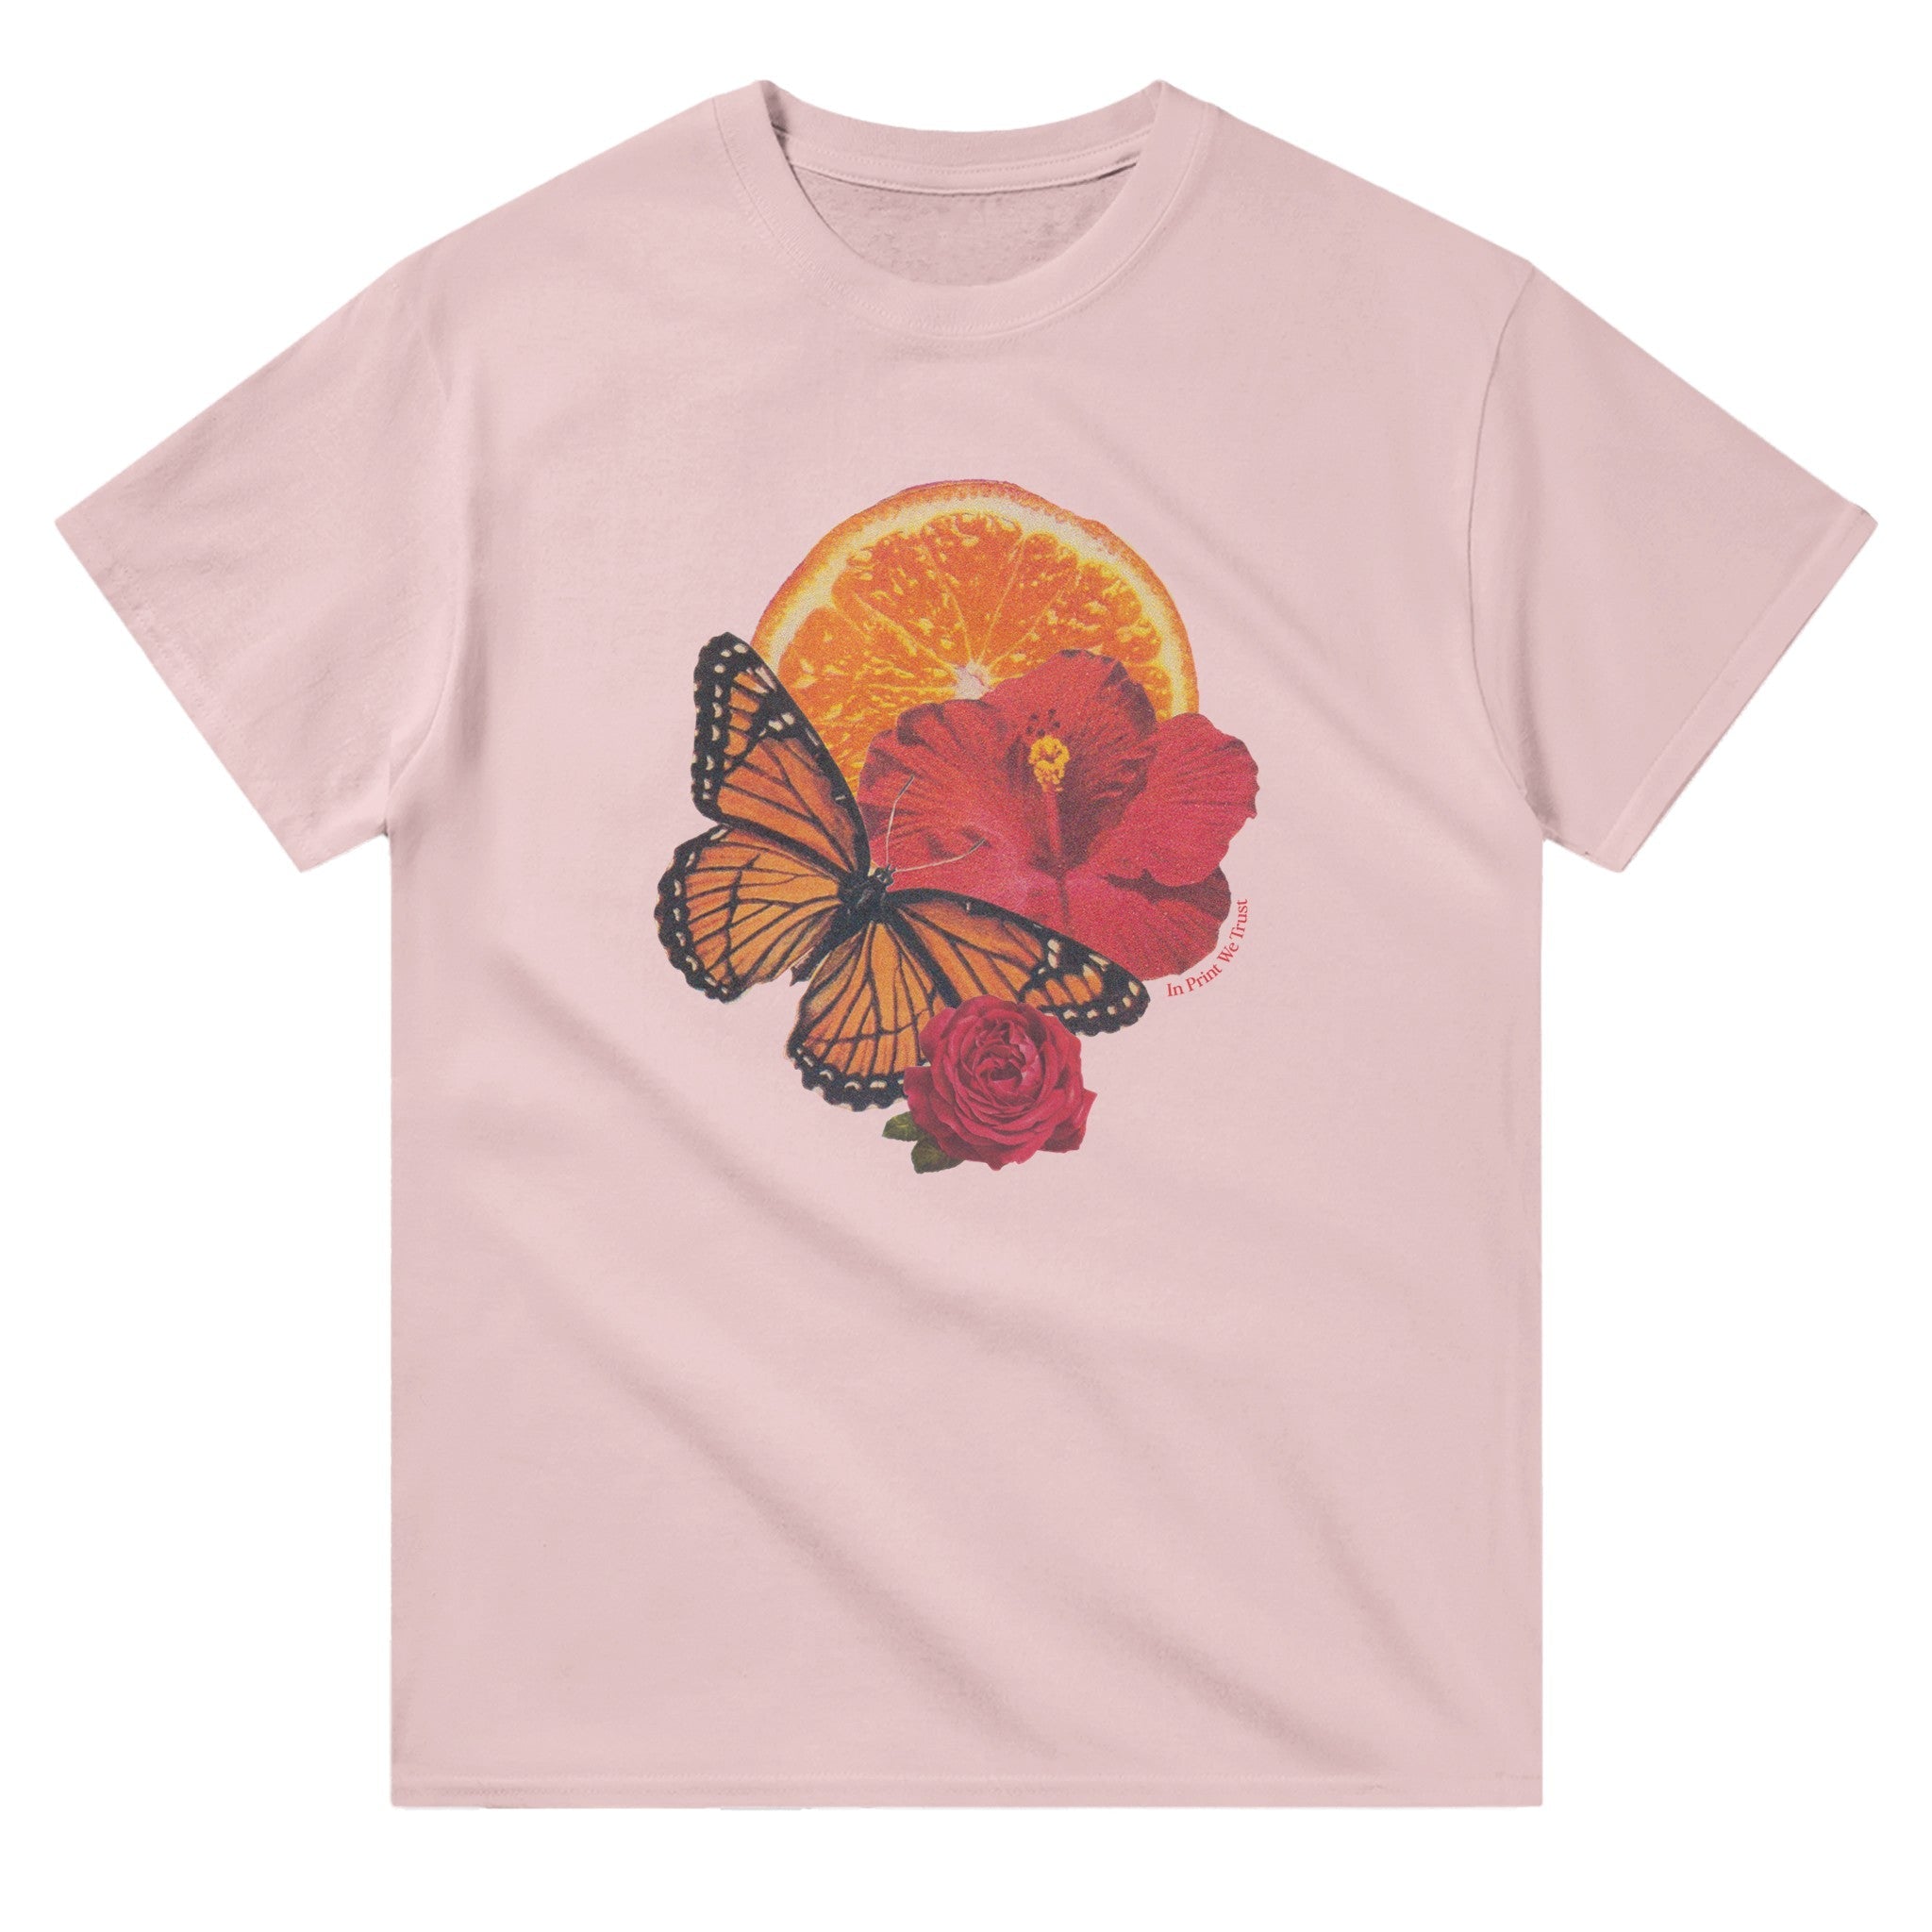 'Natural Beauty' classic tee - In Print We Trust